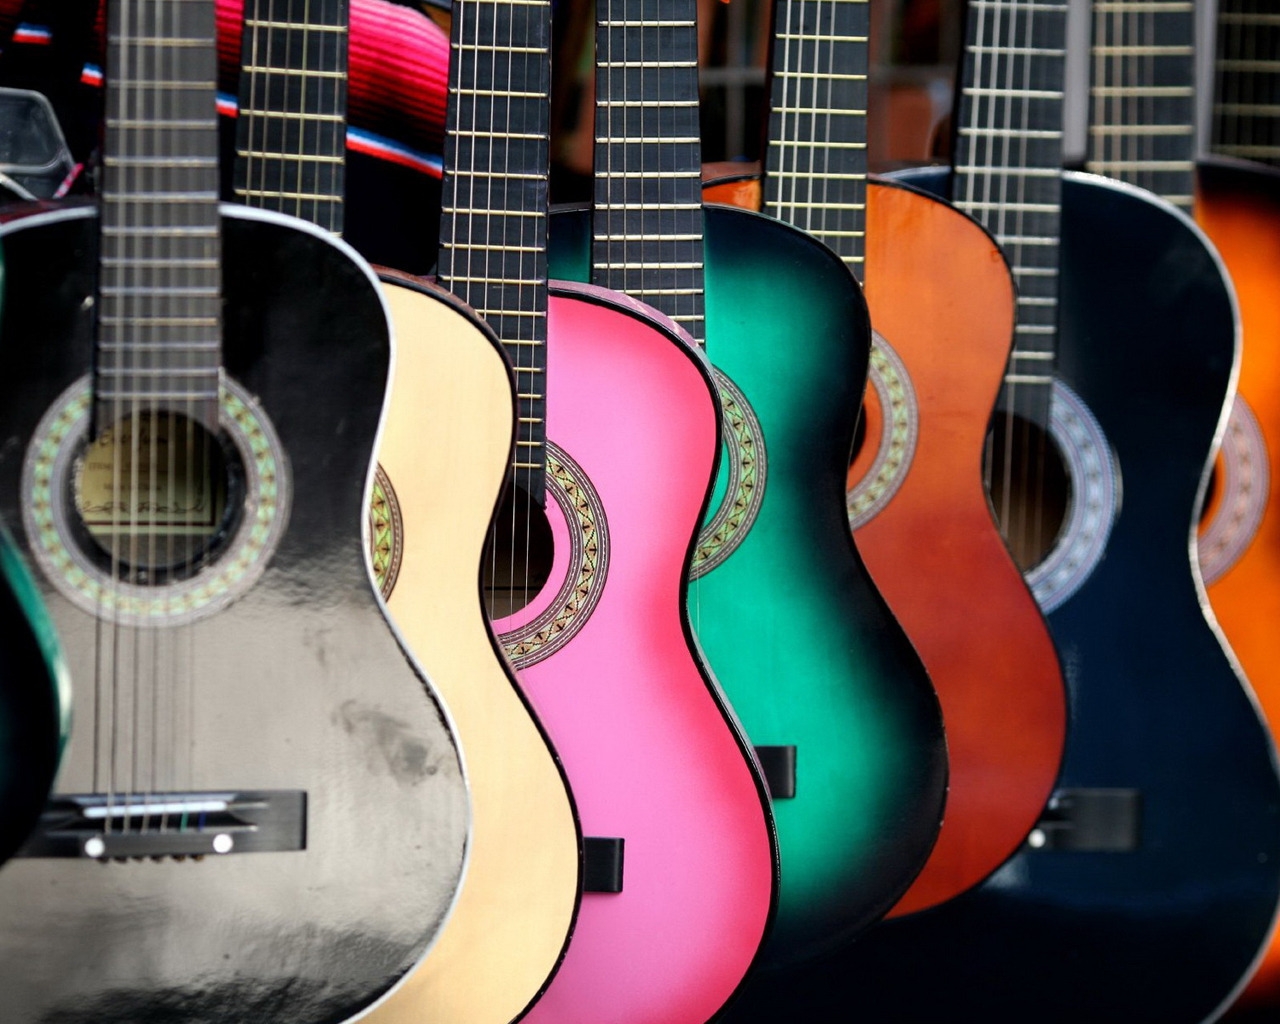 Colored Guitars for 1280 x 1024 resolution